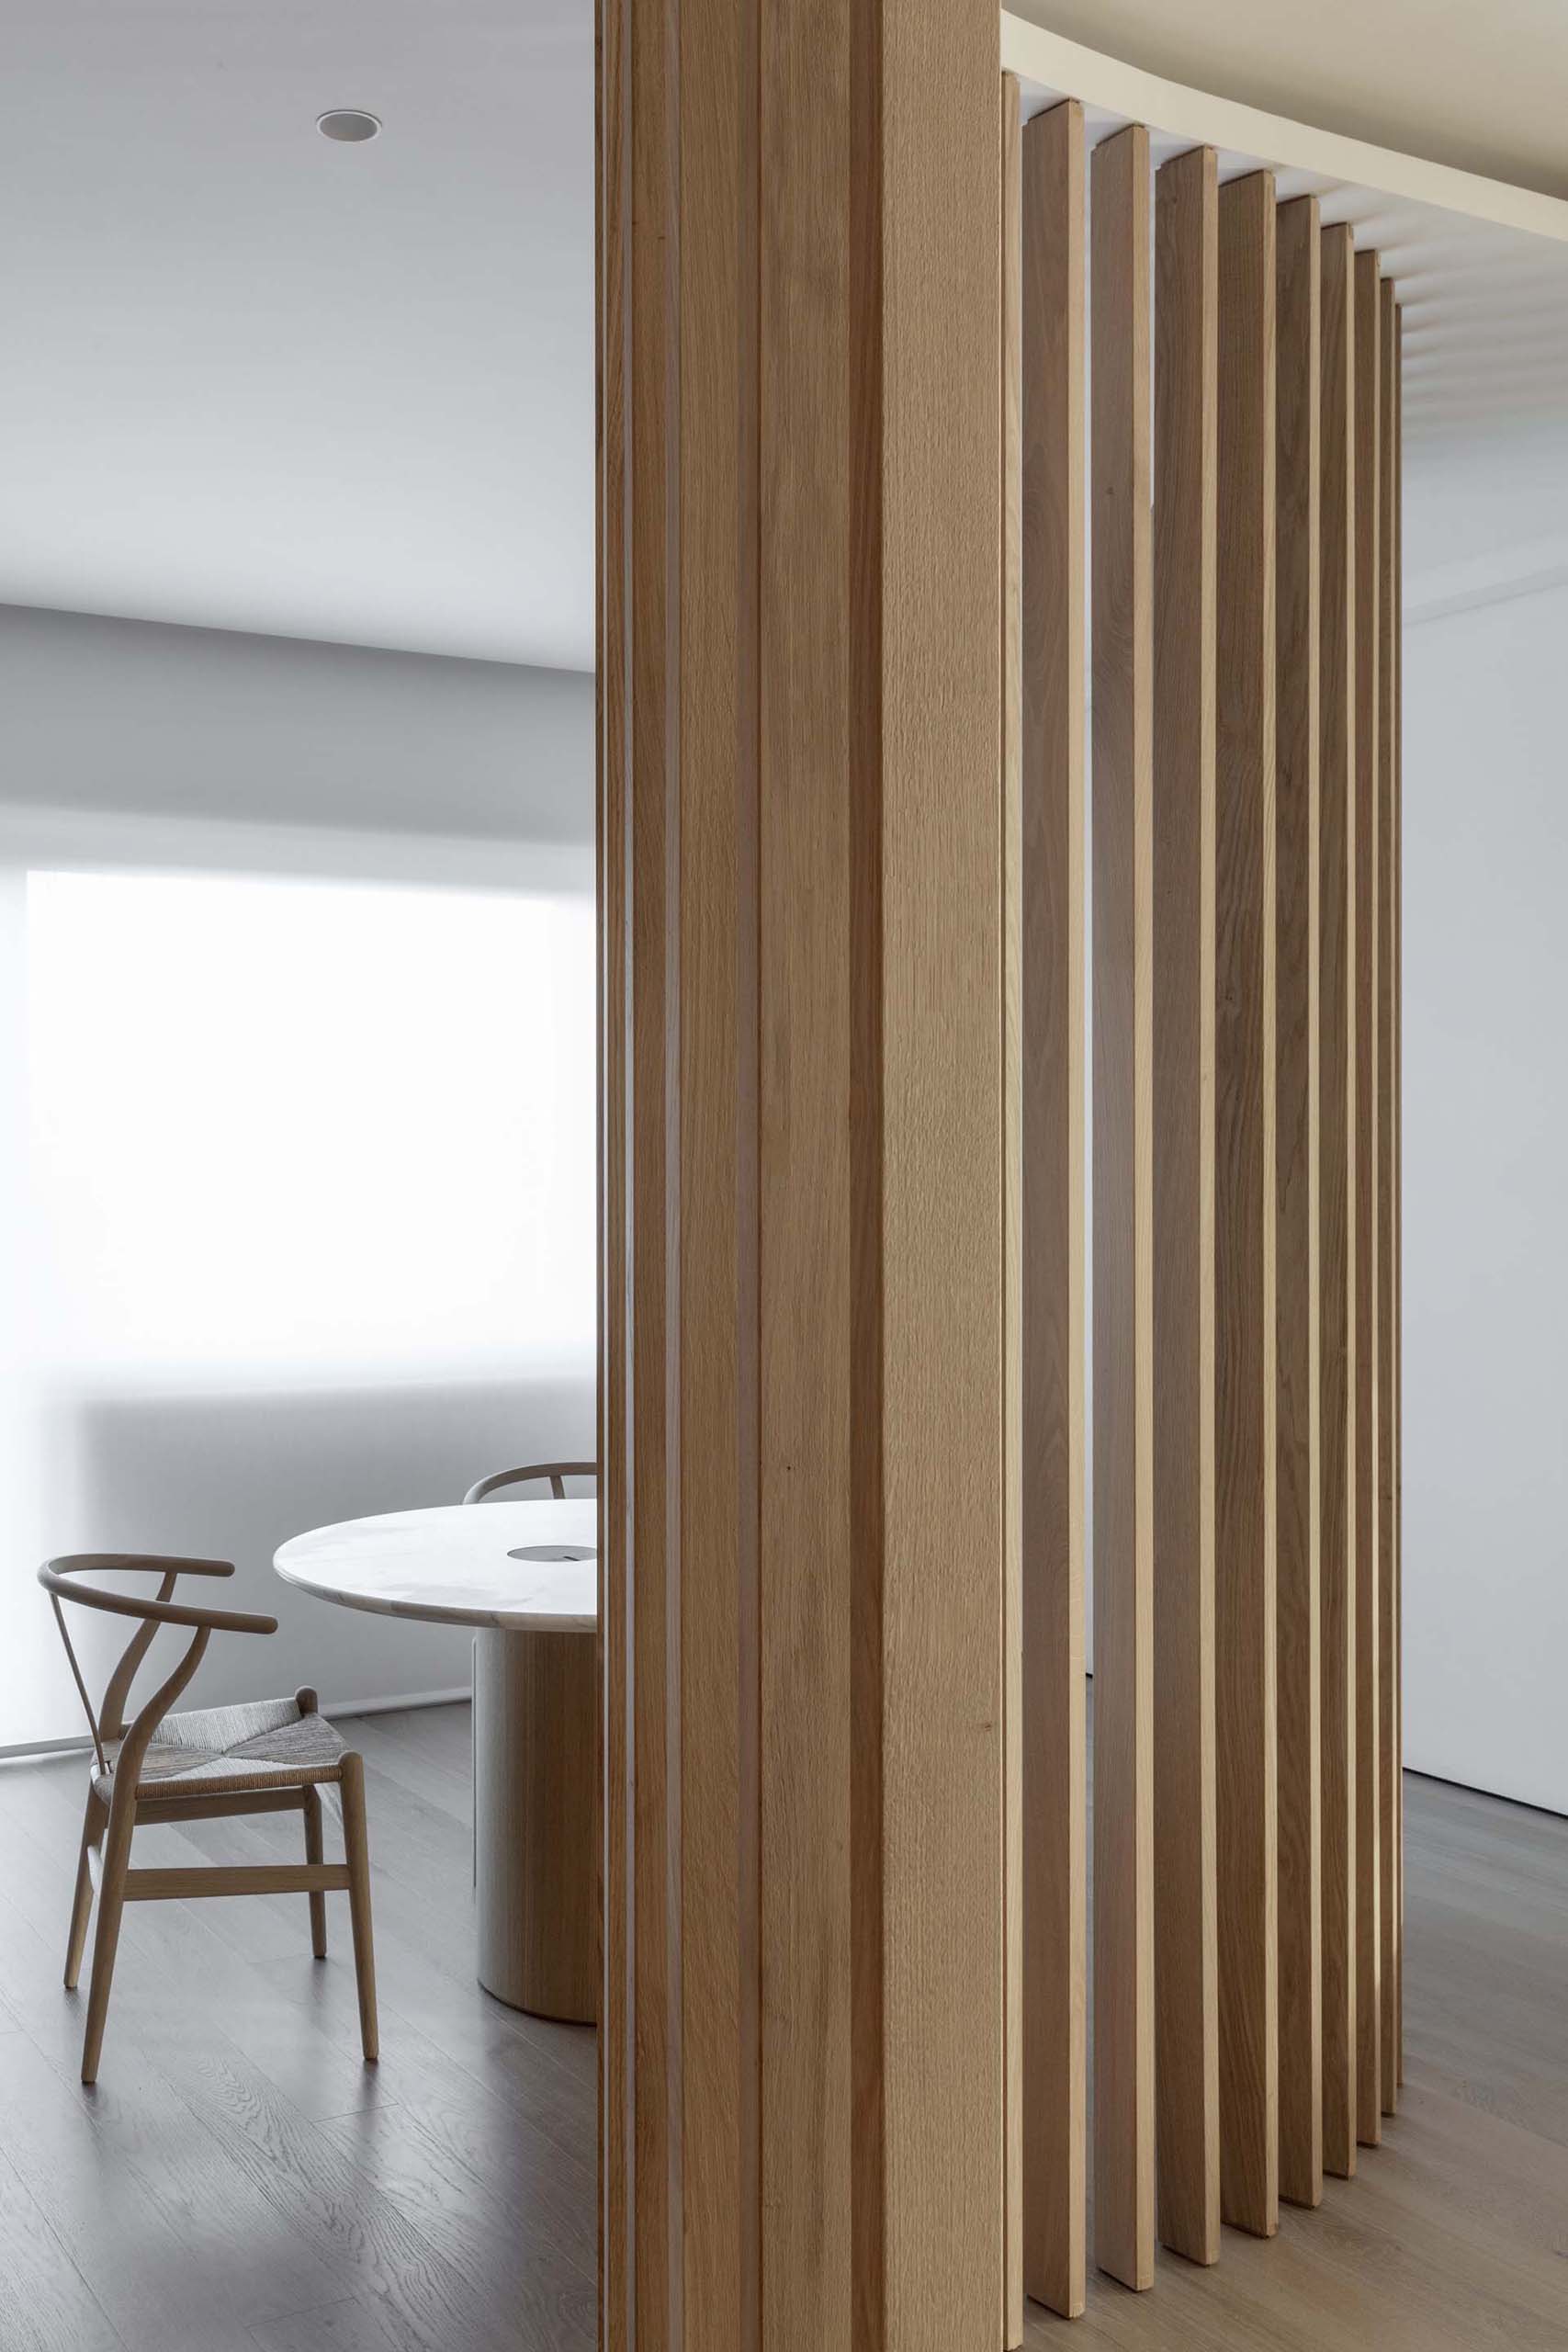 An curved oak slat partition separates the study from the living room.